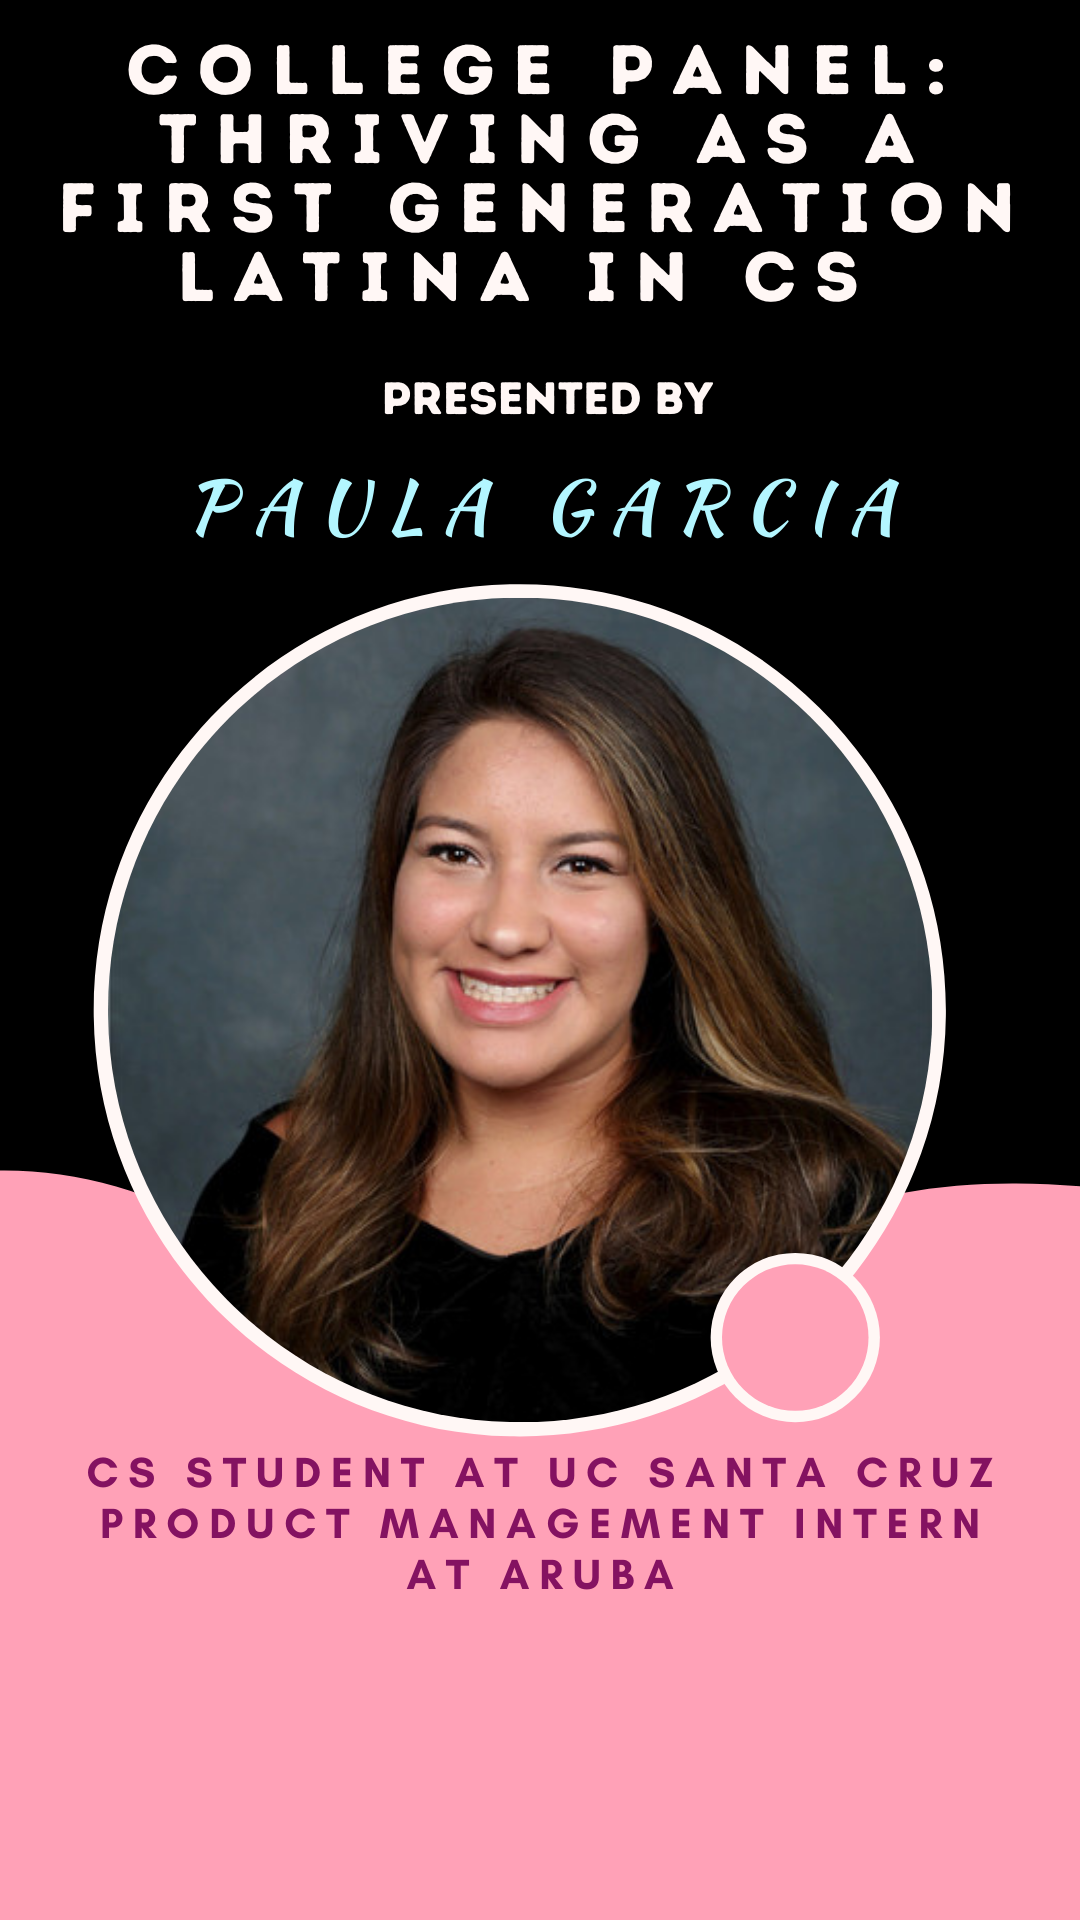 link to her talk "College panel: Thriving as a first generation Latina in CS"